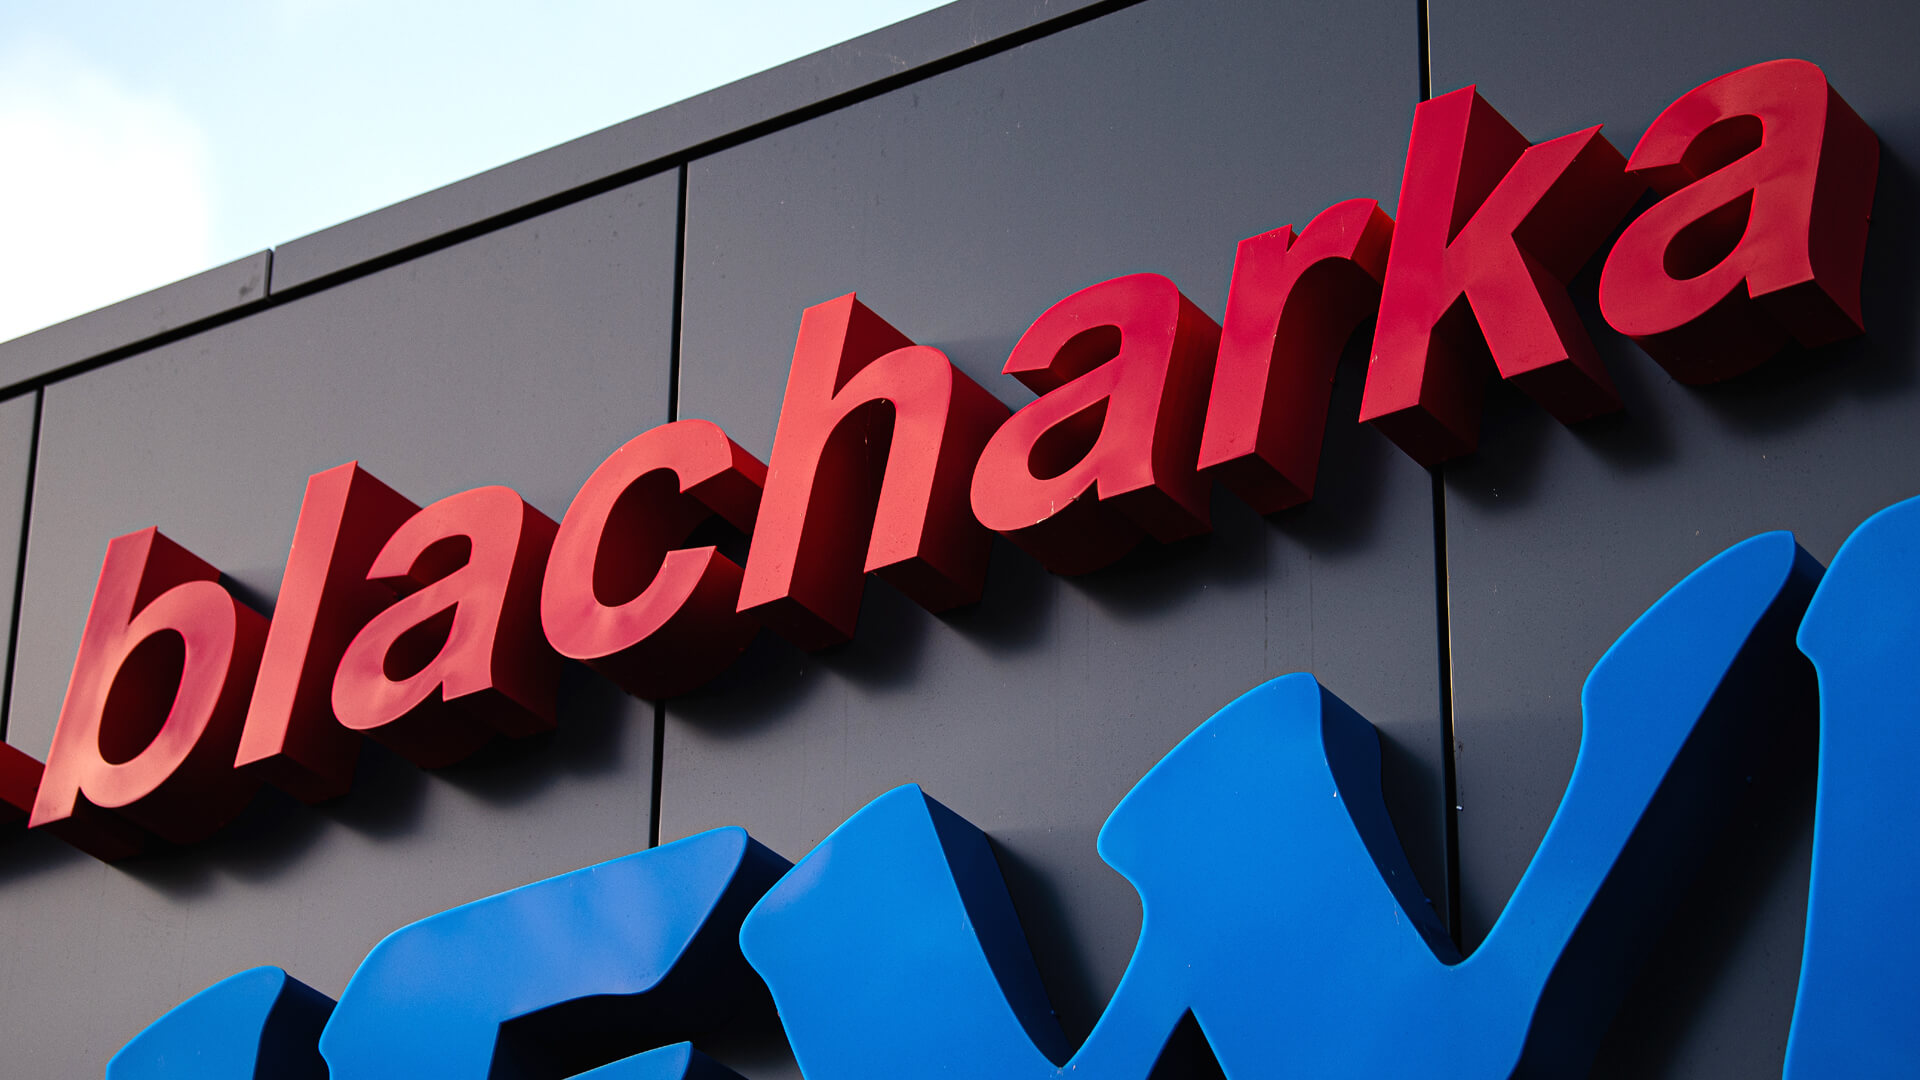 Auto blacharka Schewe - LED front and side illuminated 3D letters